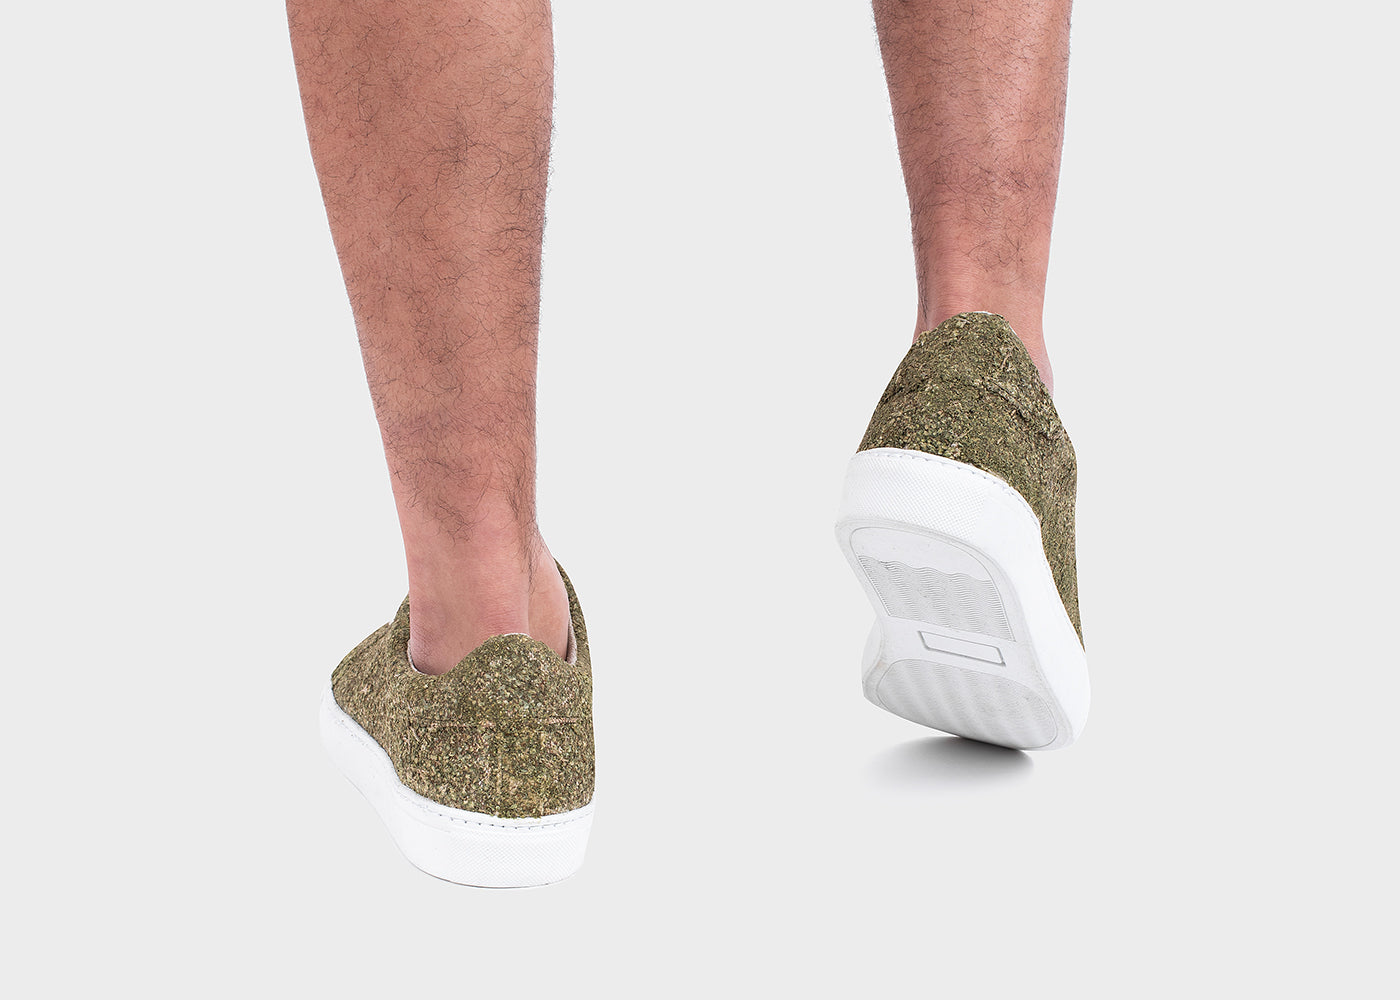 Weedo - Limited edition weed shoes